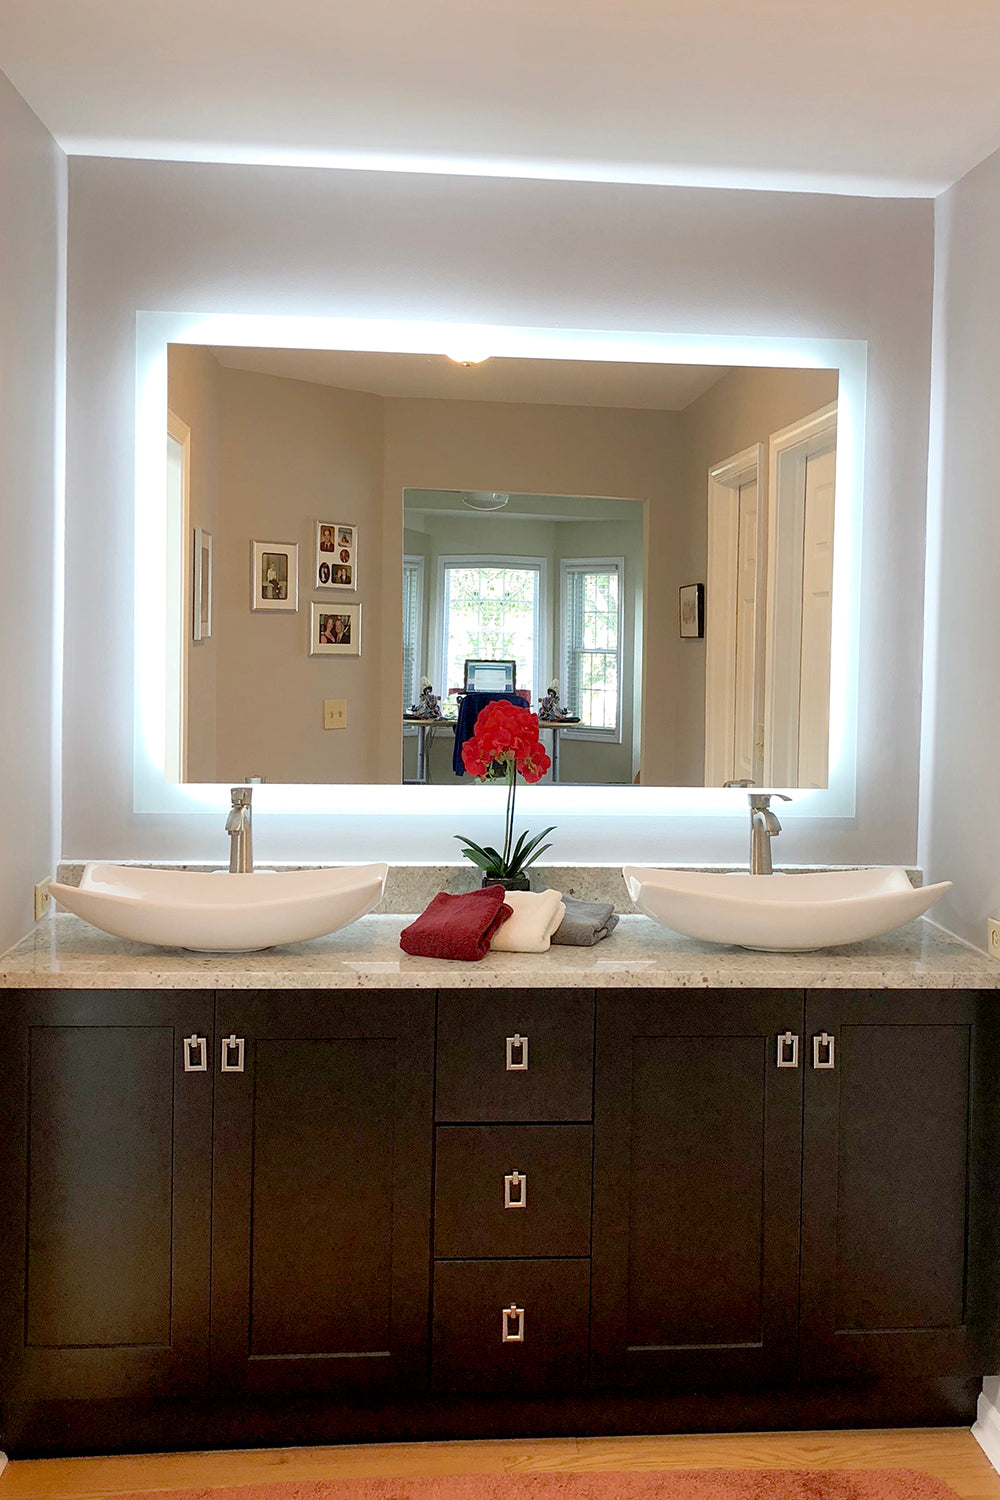 LED Mirror (Side-Lighted) 60" x 36"